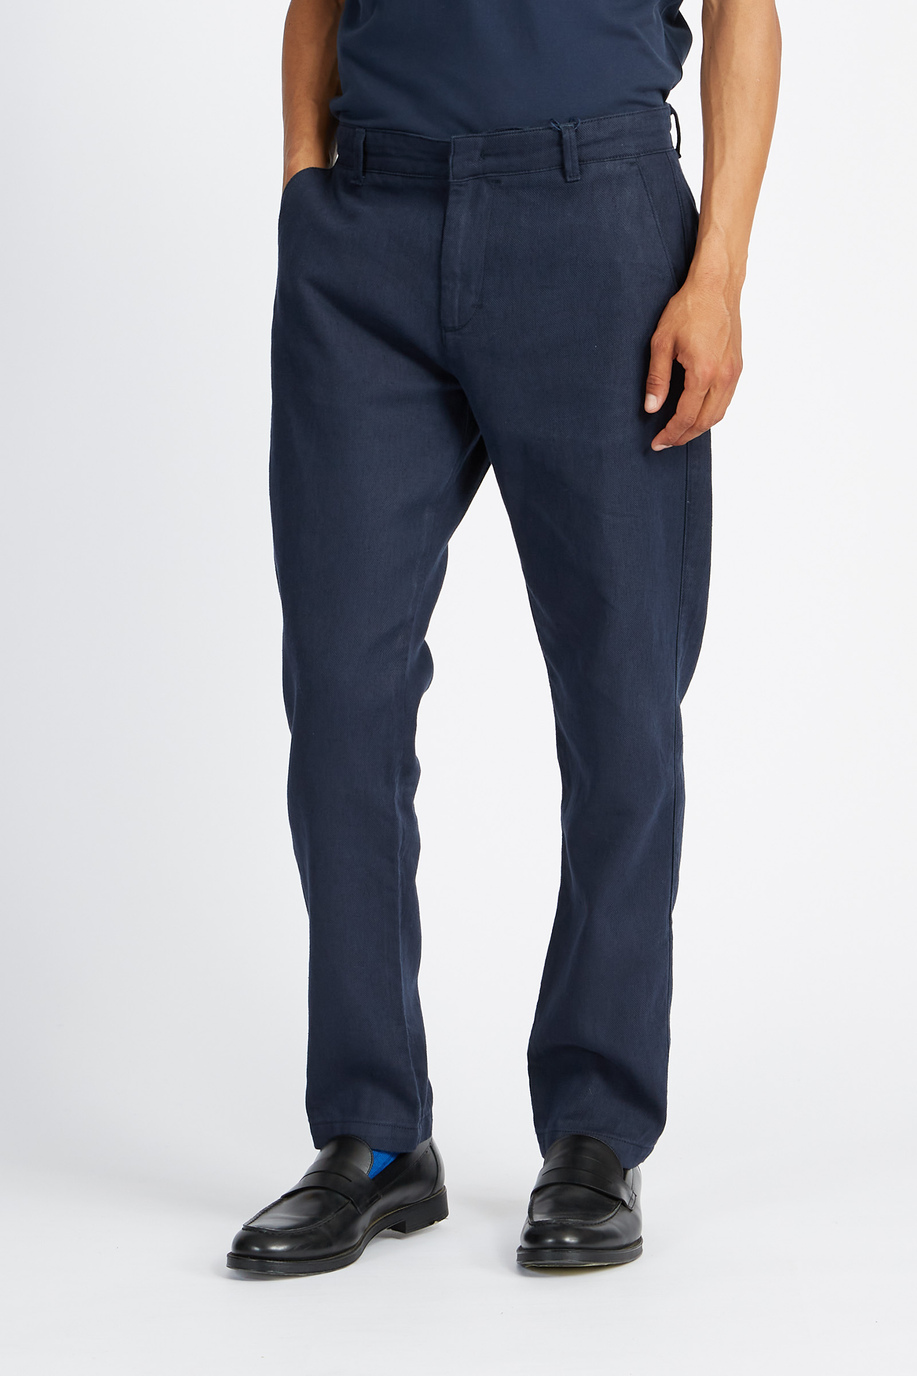 Straight cut men's chino trousers in plain color Logos - Vickan - Giftguide | La Martina - Official Online Shop